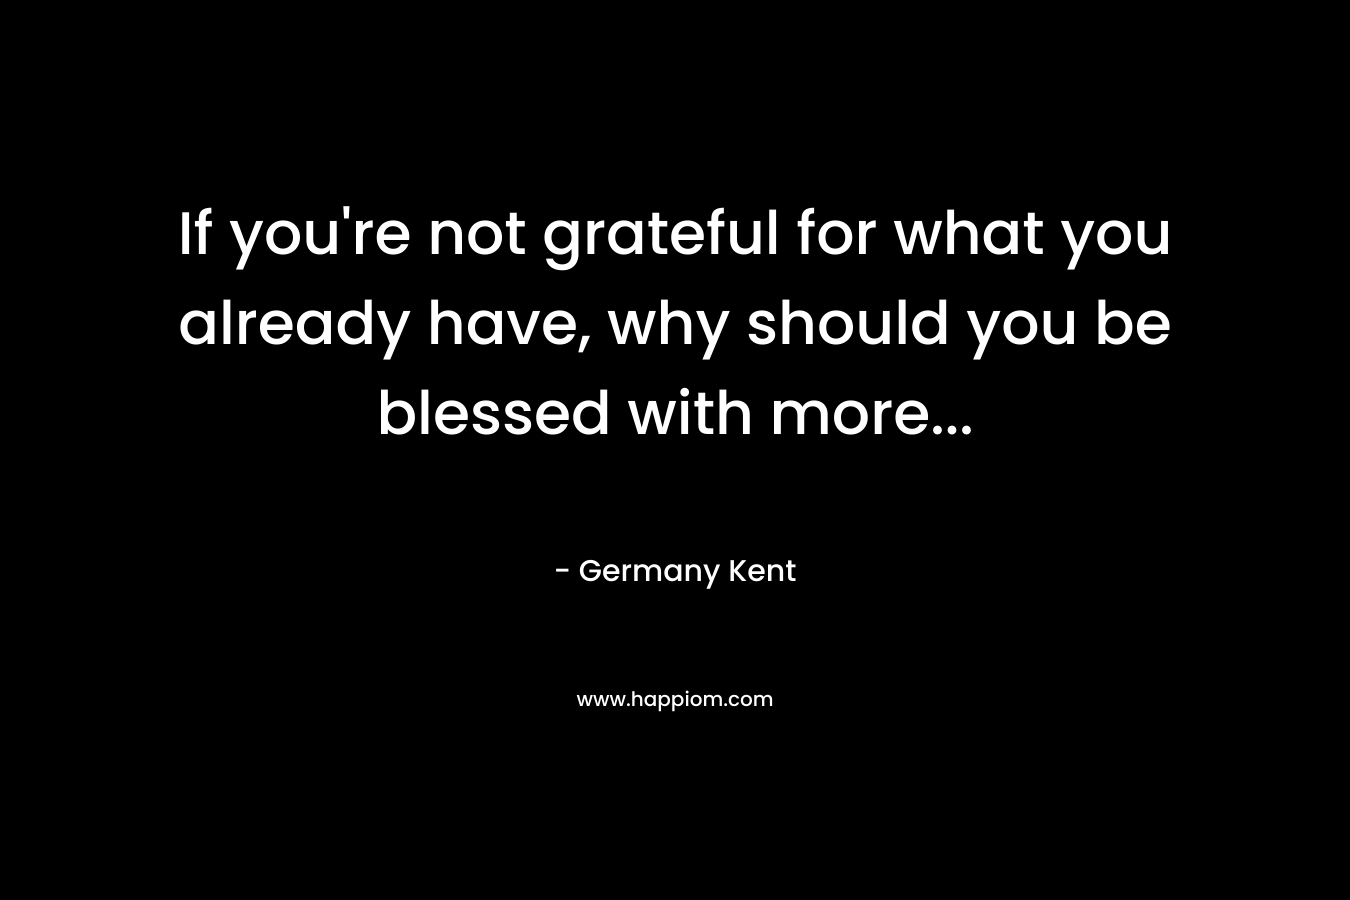 If you’re not grateful for what you already have, why should you be blessed with more… – Germany Kent